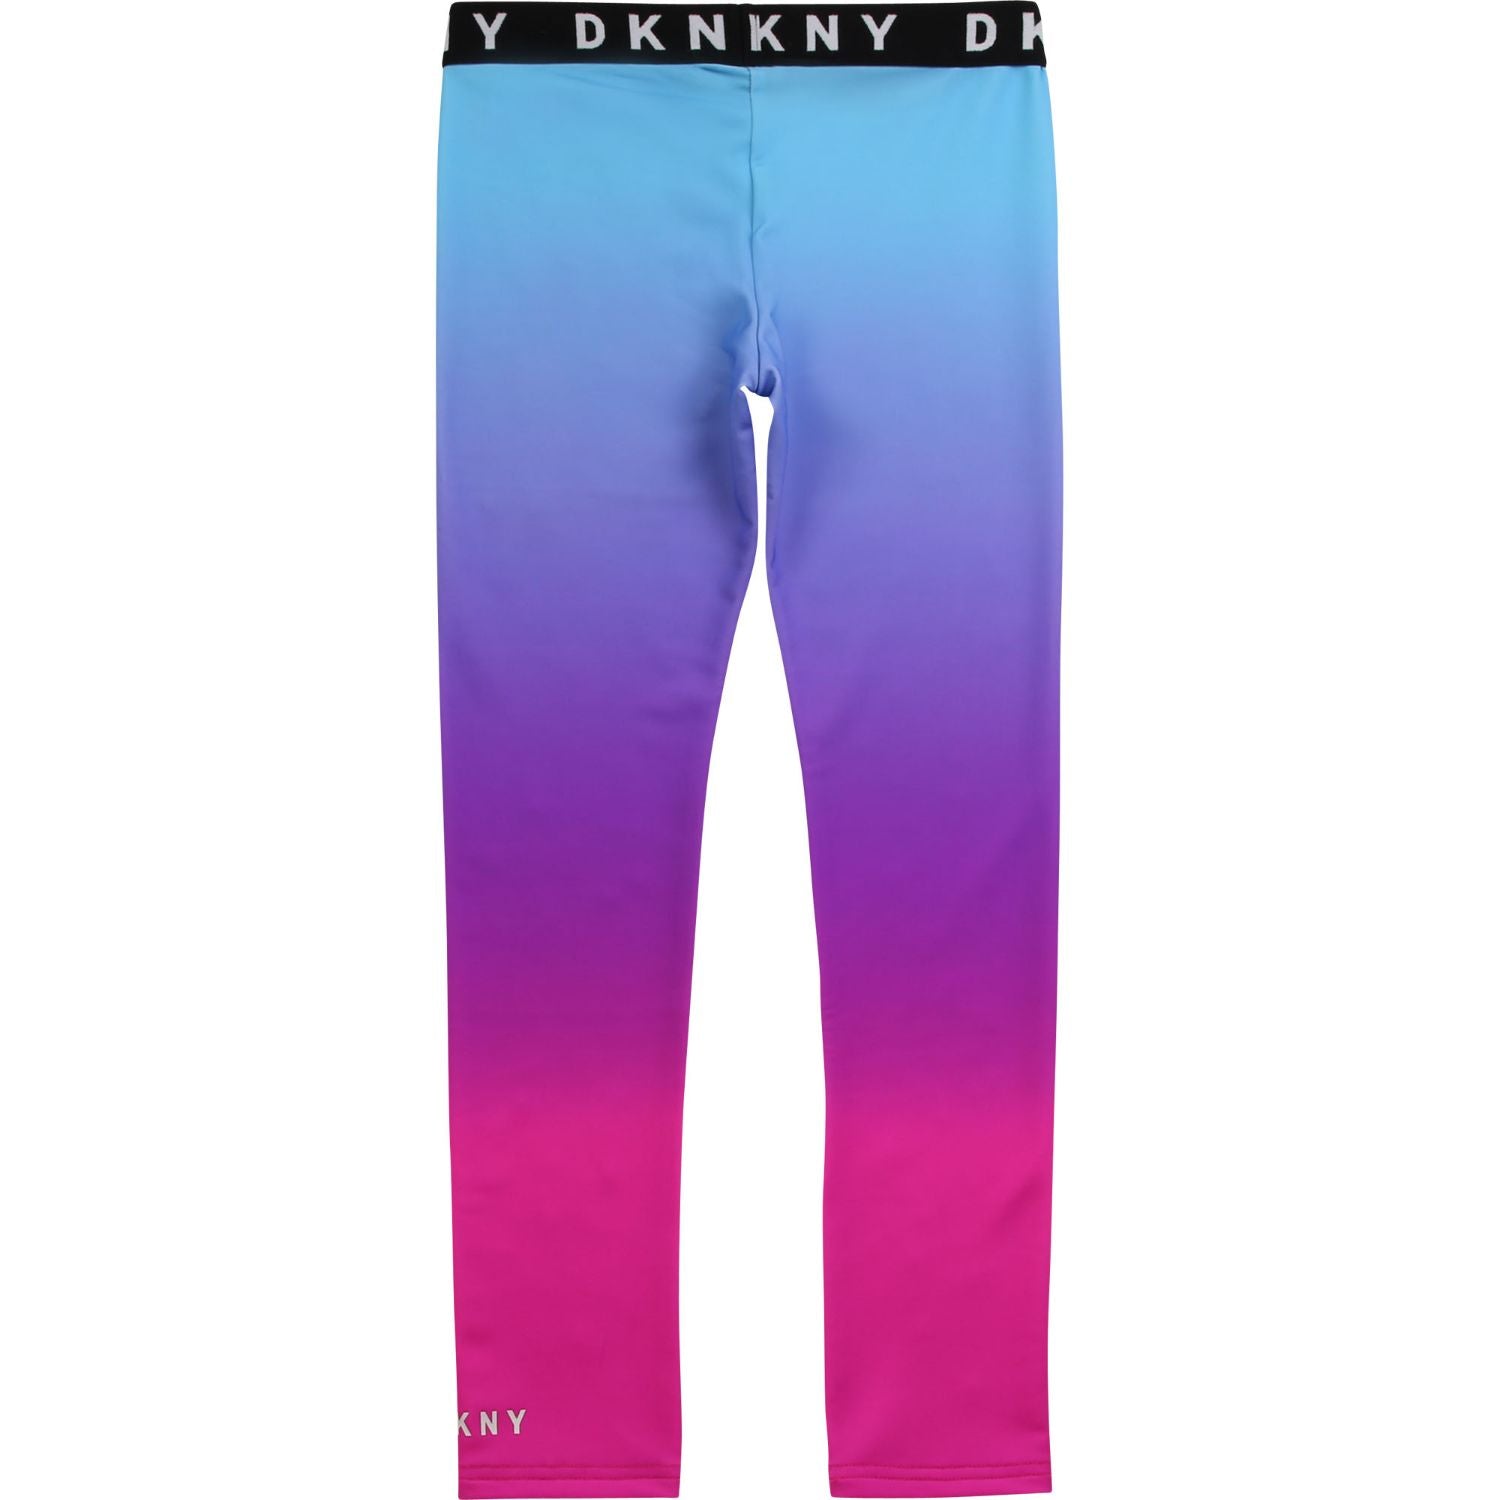 DNKY, Bottoms, Dkny Girls Leggings Multipack 3 Pack Stretch Pants Kids  Bundle Size 56 Nwt